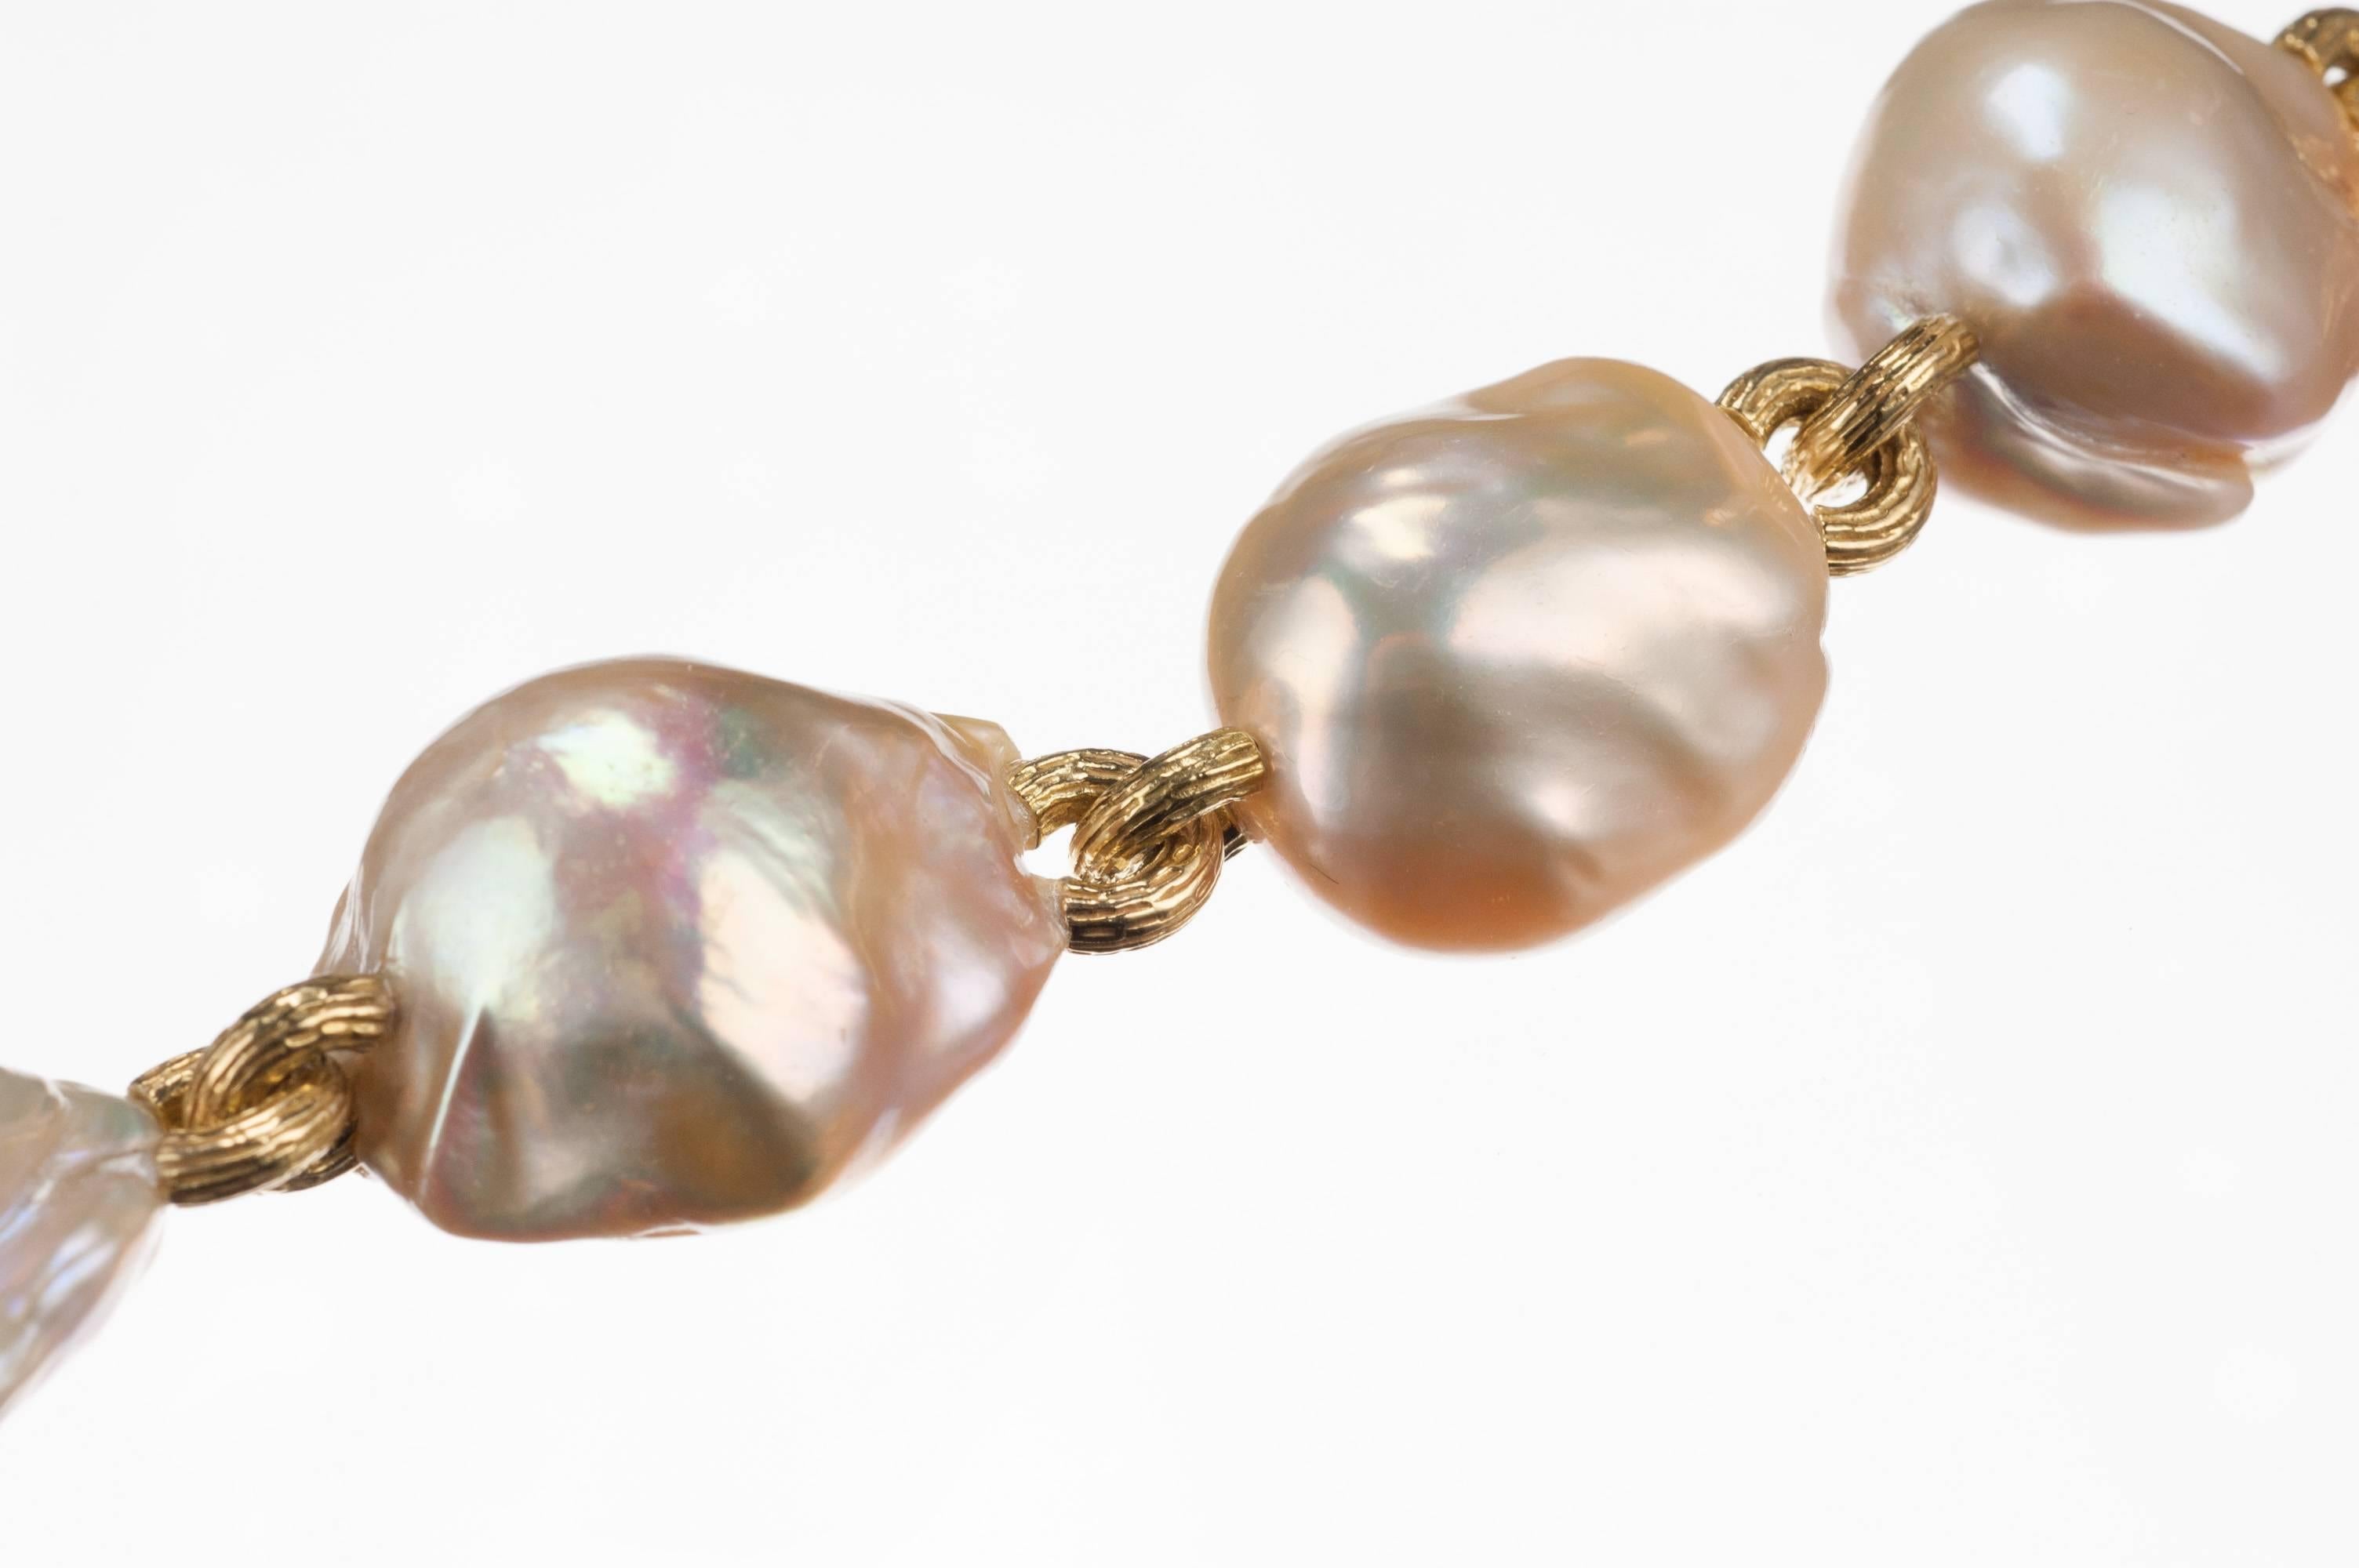 Seven multi-colored freshwater cultured baroque pearls are connected by textured 18-karat yellow gold links. Shades of blush, white, grey, and green create a soft blending of tones. This chunky bracelet, from Israeli designer Yvel, also has a